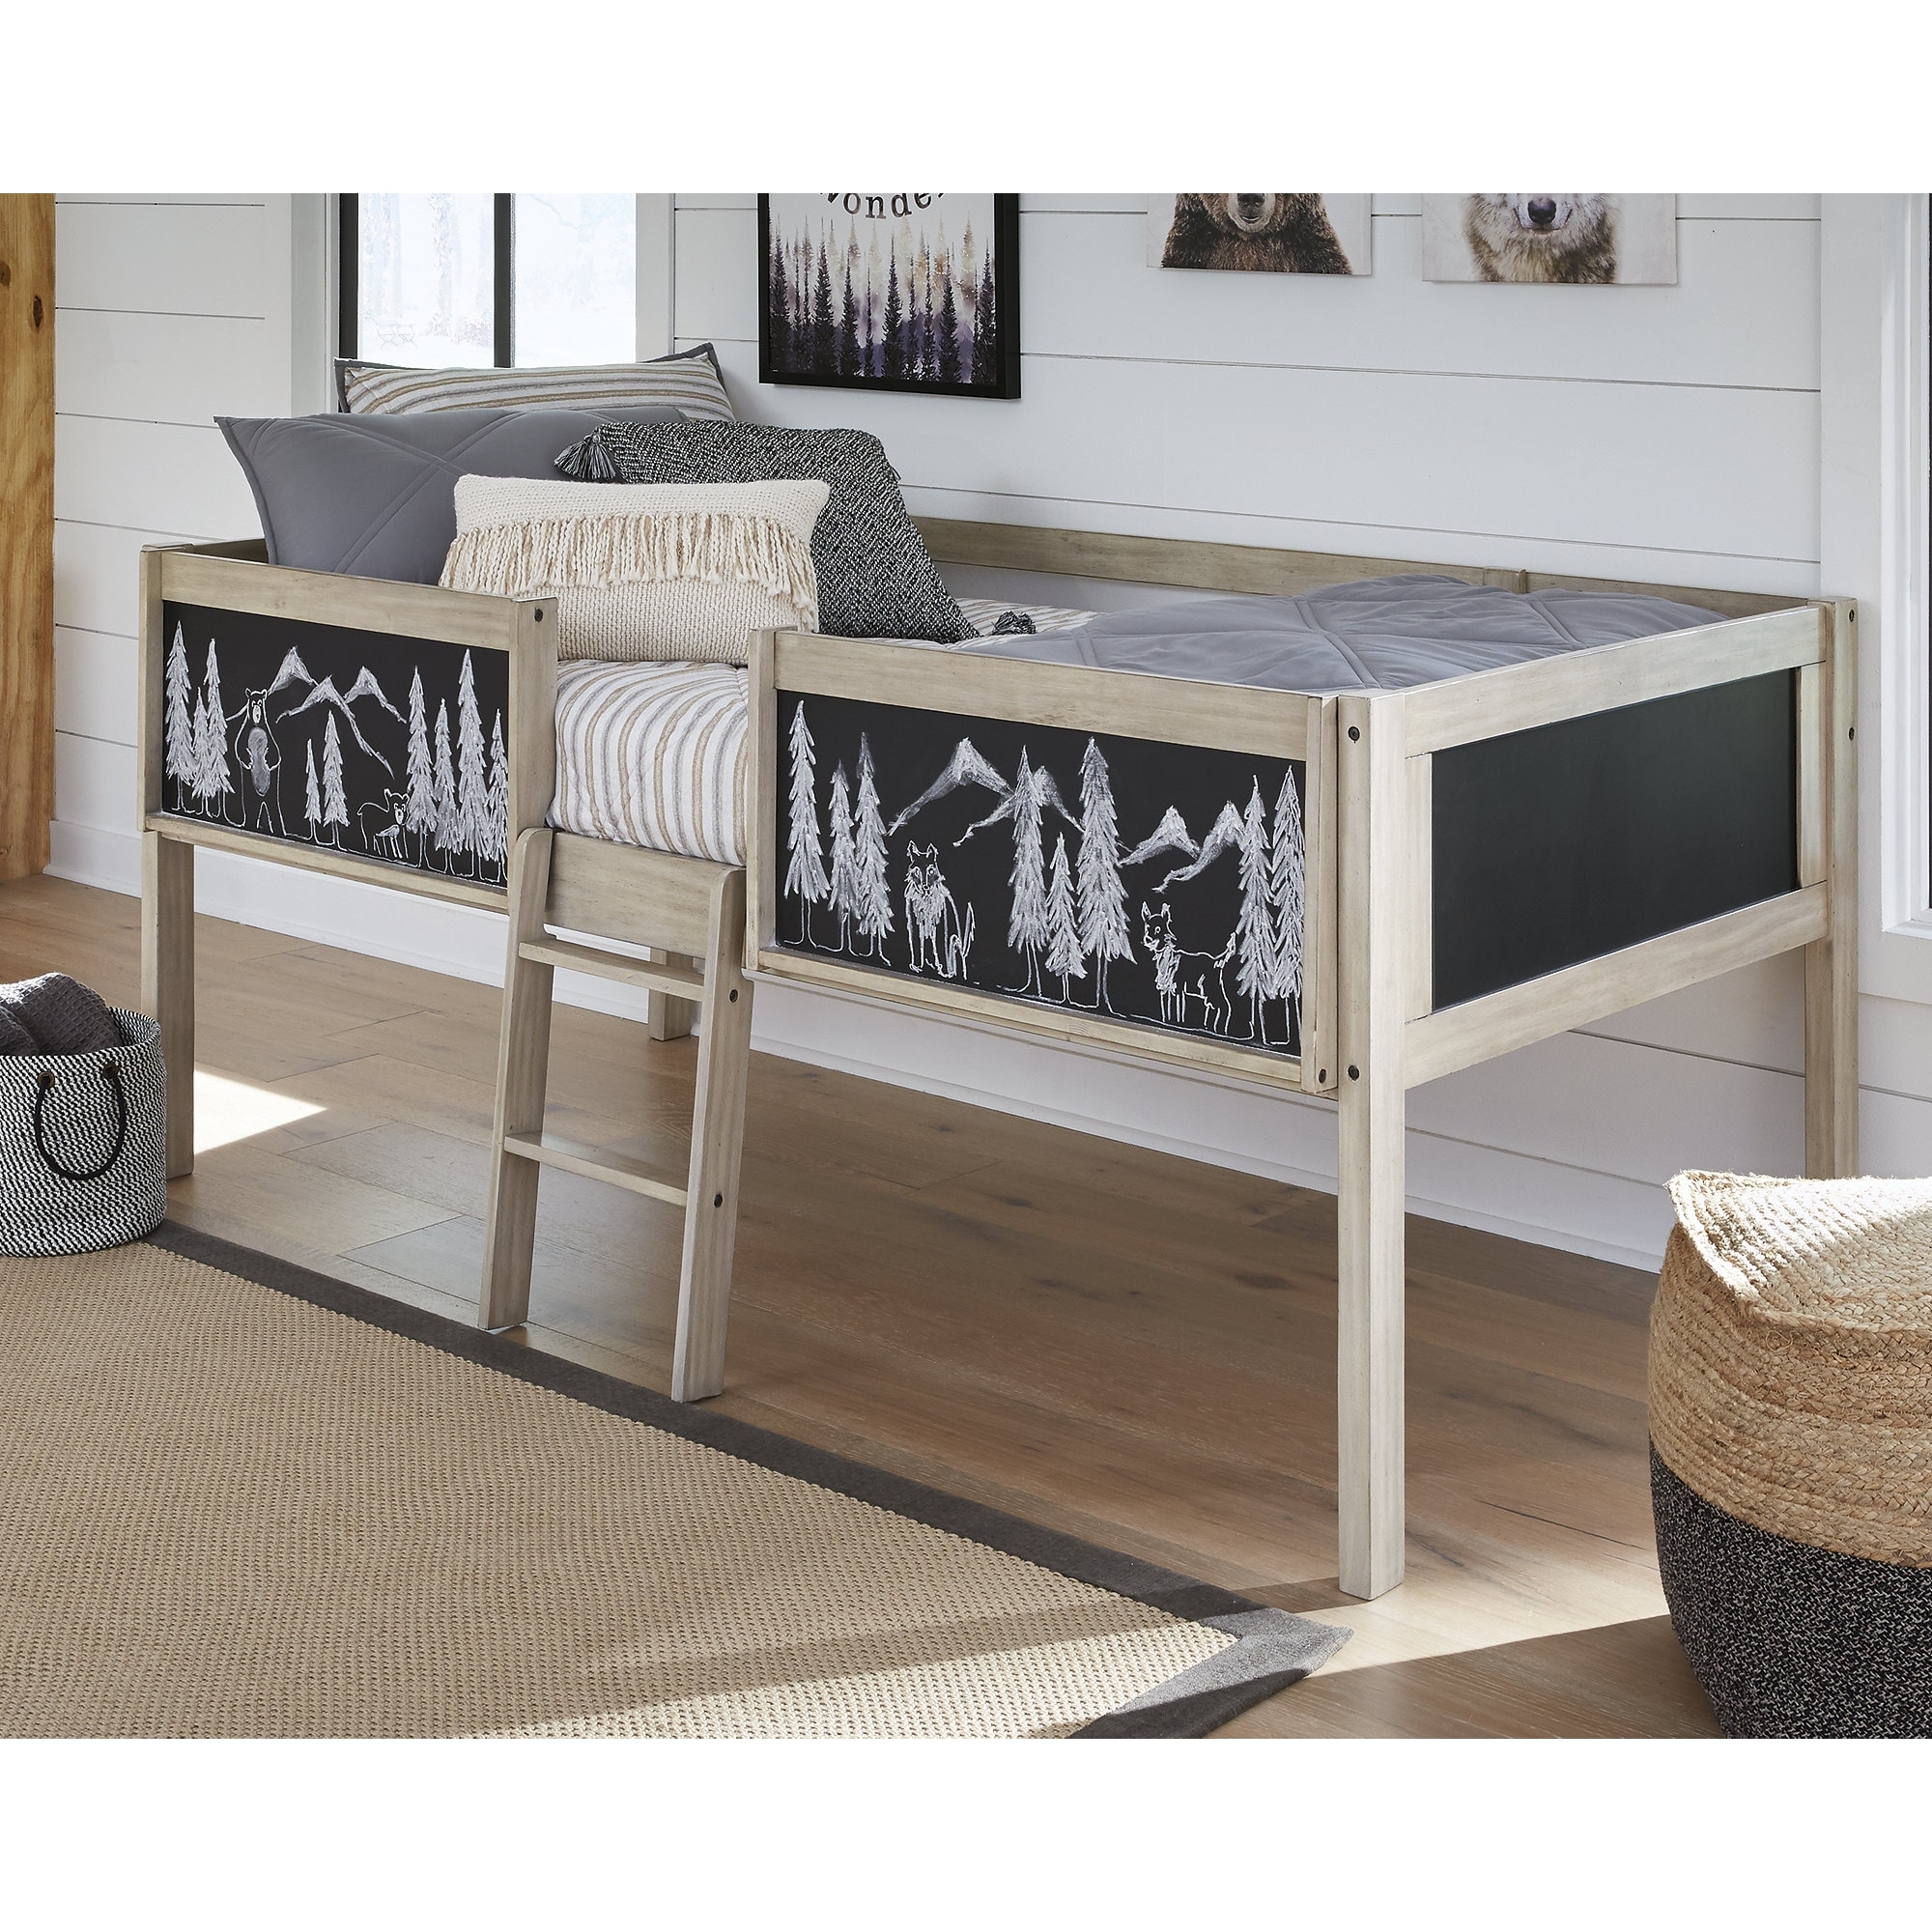 Wrenalyn Natural Wood Twin Loft Bed Frame With Chalkboard Panels Overstock 32596746